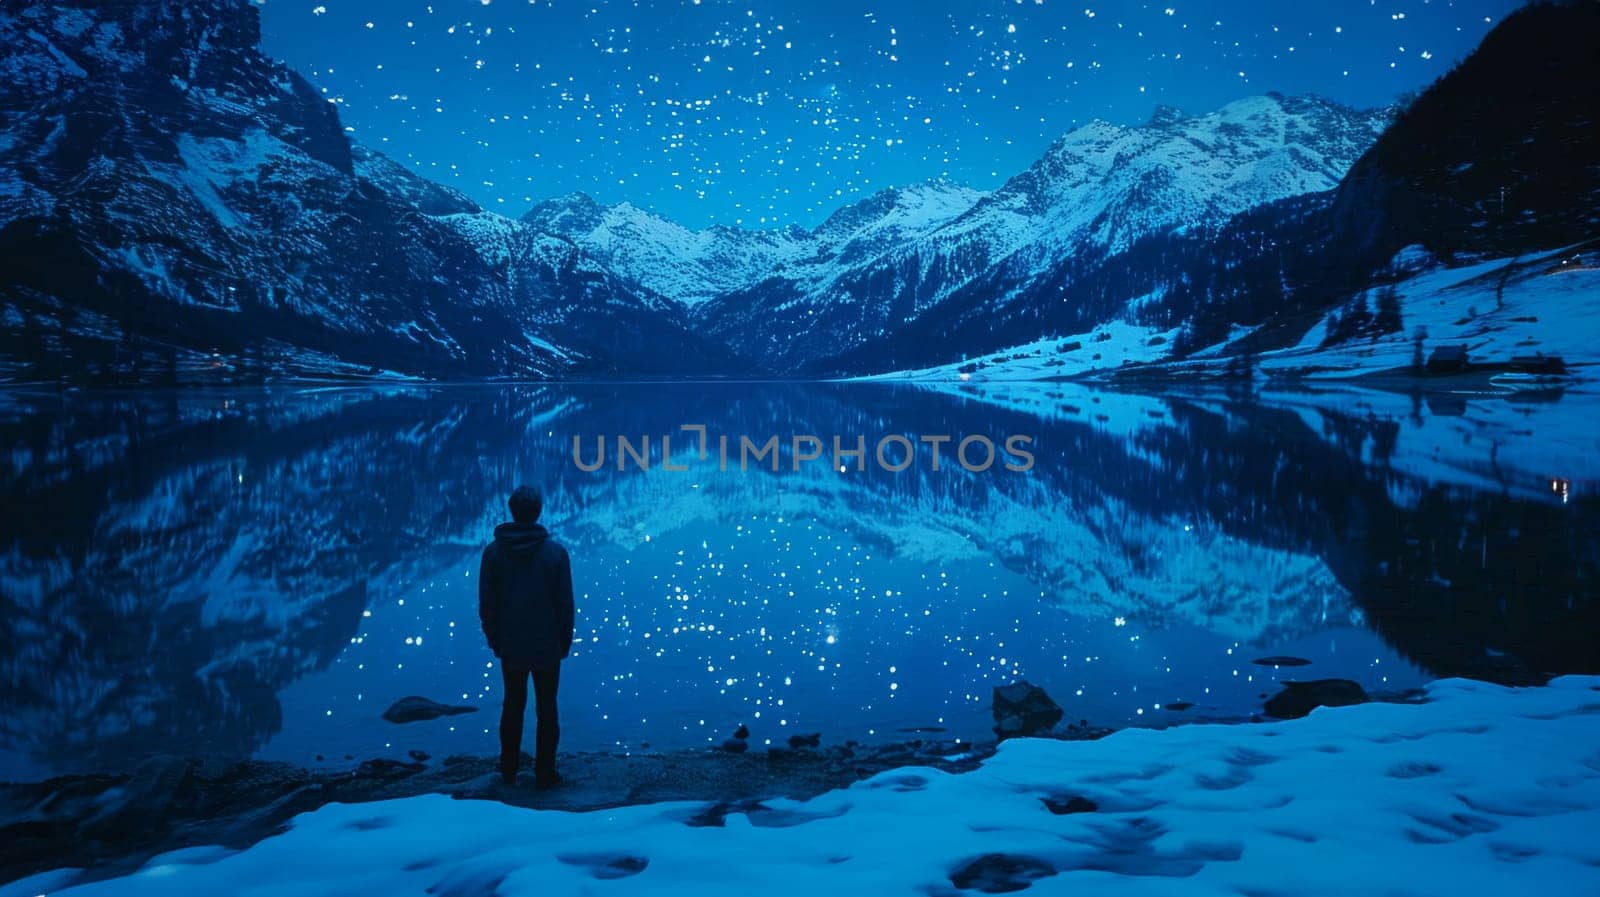 A silhouette of a person standing still in front of a calm lake under the starlit night sky, surrounded by peaceful reflections and a sense of serenity.